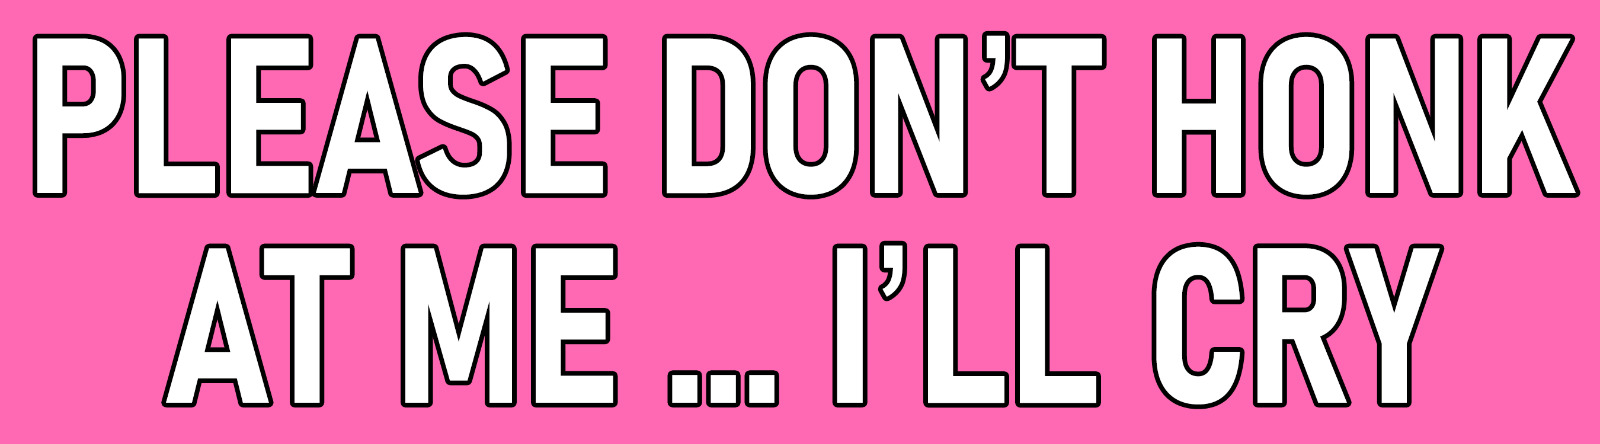 Please Don\'t Honk At Me I\'ll Cry Bumper Sticker Funny Car Decal